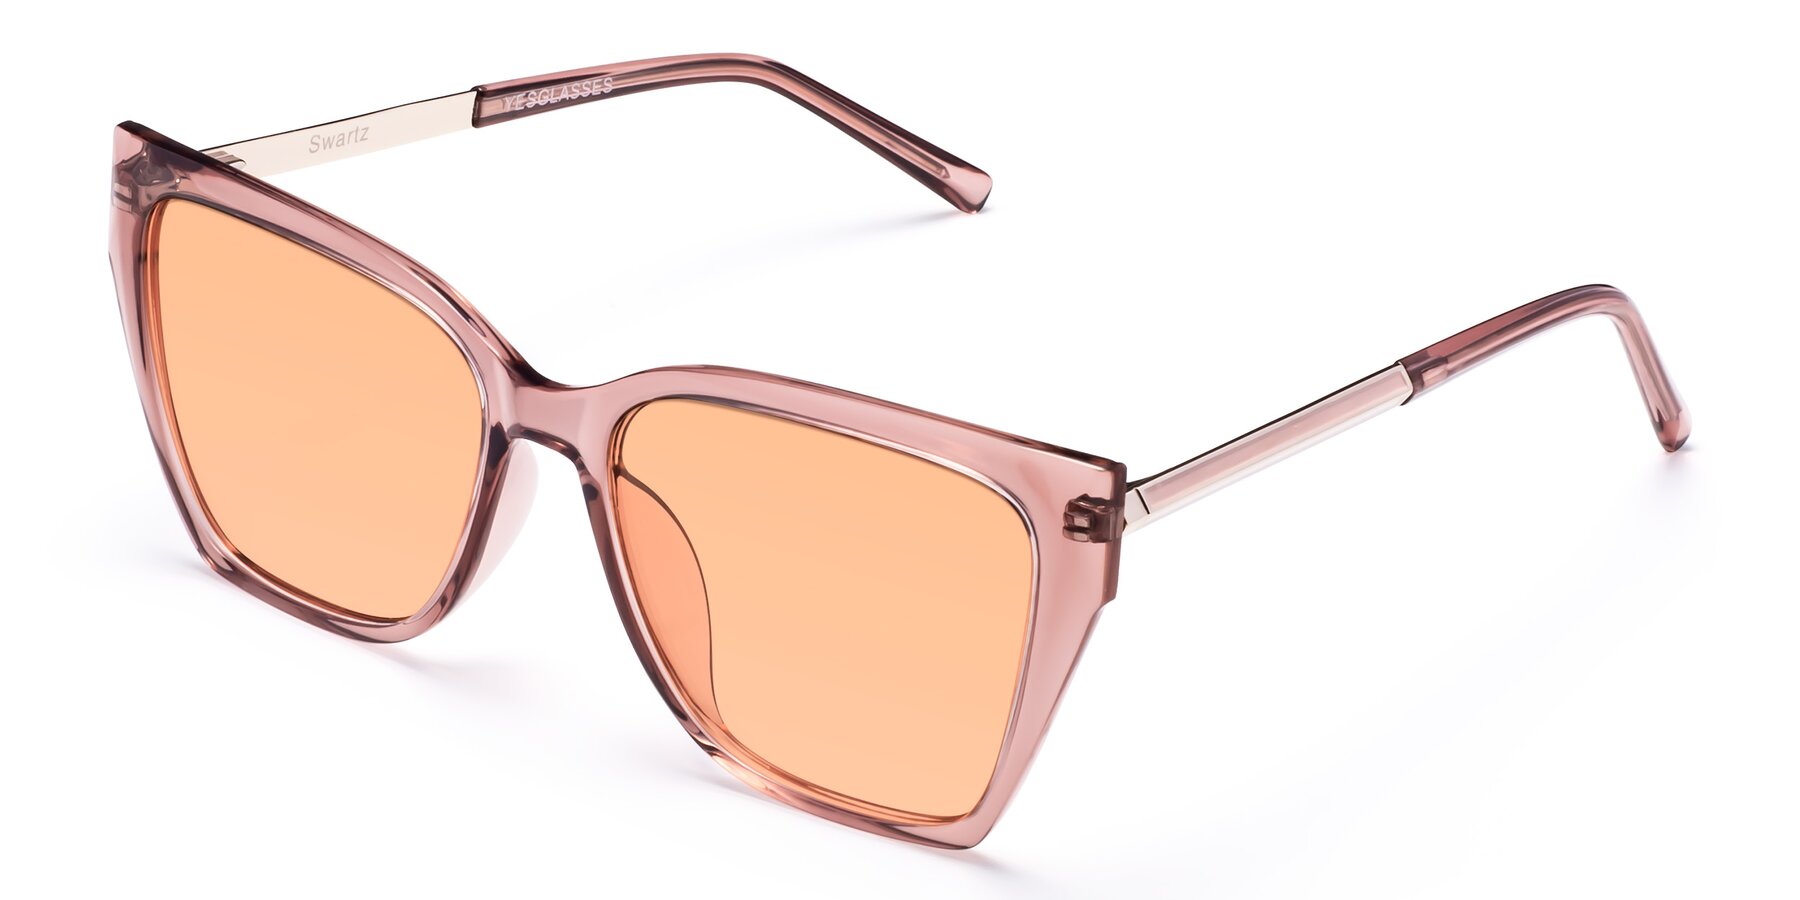 Angle of Swartz in Grape with Light Orange Tinted Lenses